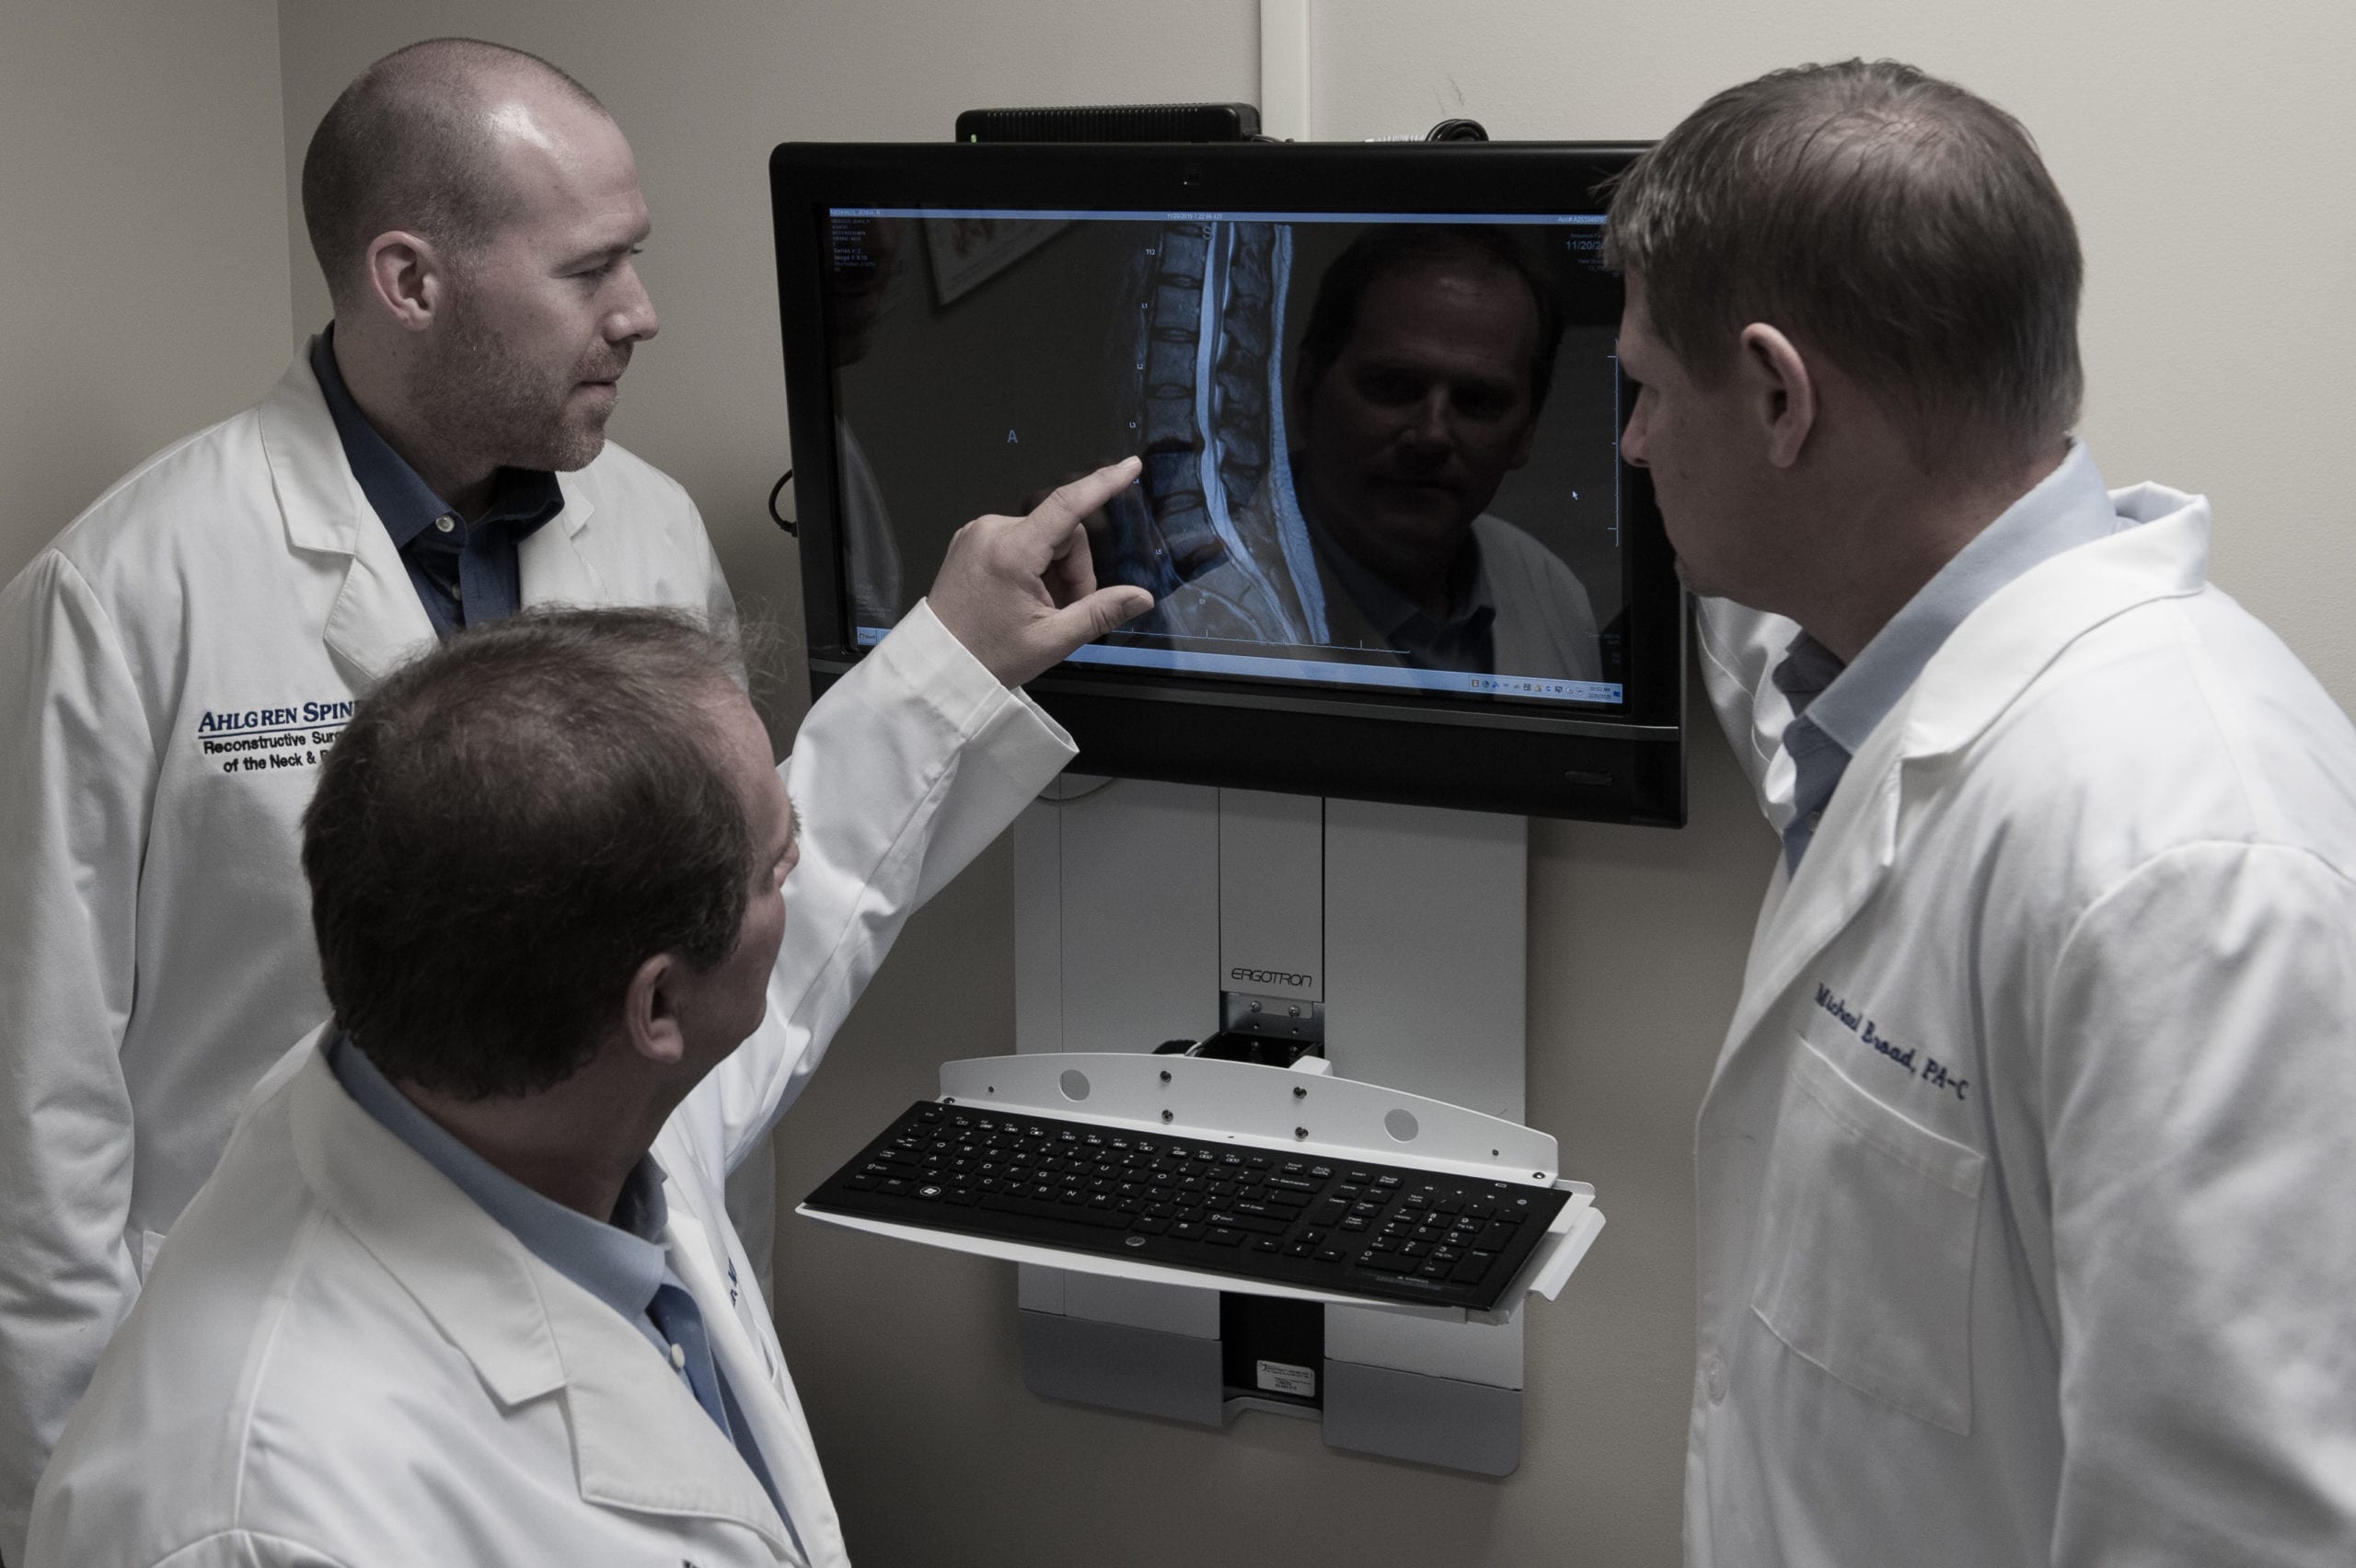 Can an Orthopedic Surgeon Help Me with Tailbone Pain in My Spine? - Bradley  D. Ahlgren, MD